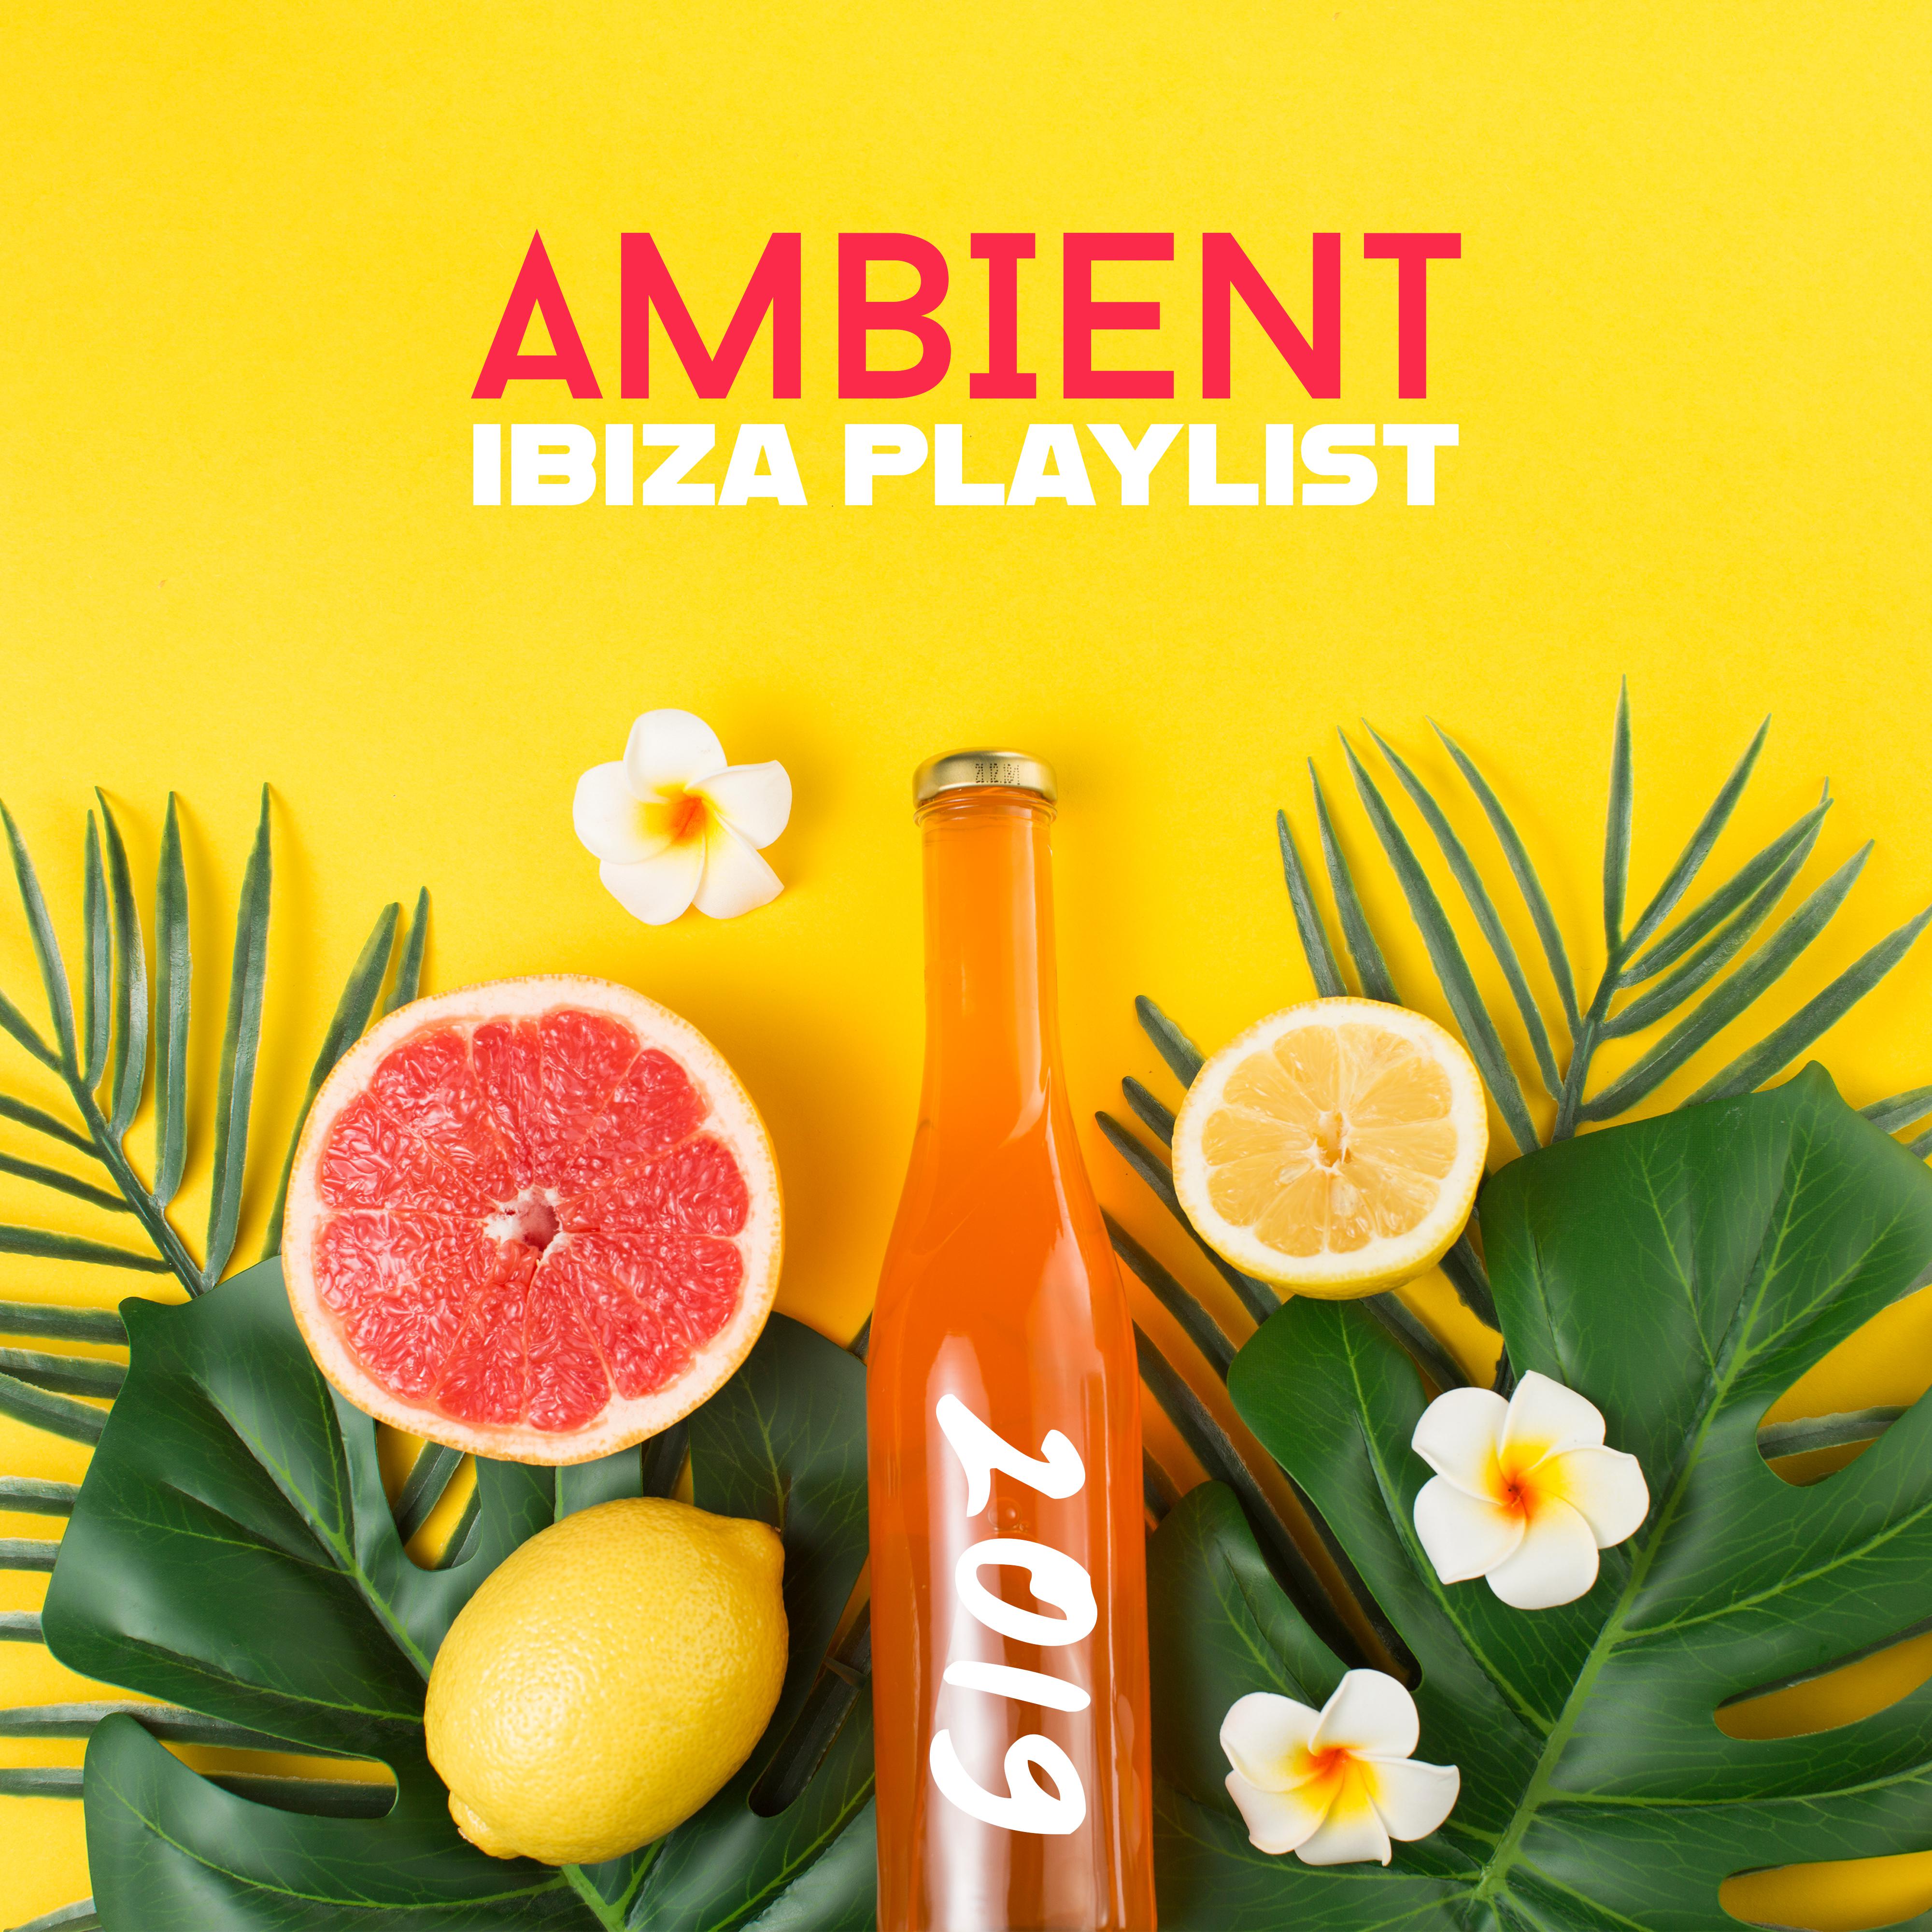 Ambient Ibiza Playlist 2019: **** Chillout Mix, Chillout Relaxing Beats, Ibiza Chill Out, Lounge Vibes, Relax 2019, Chilled Lounge House